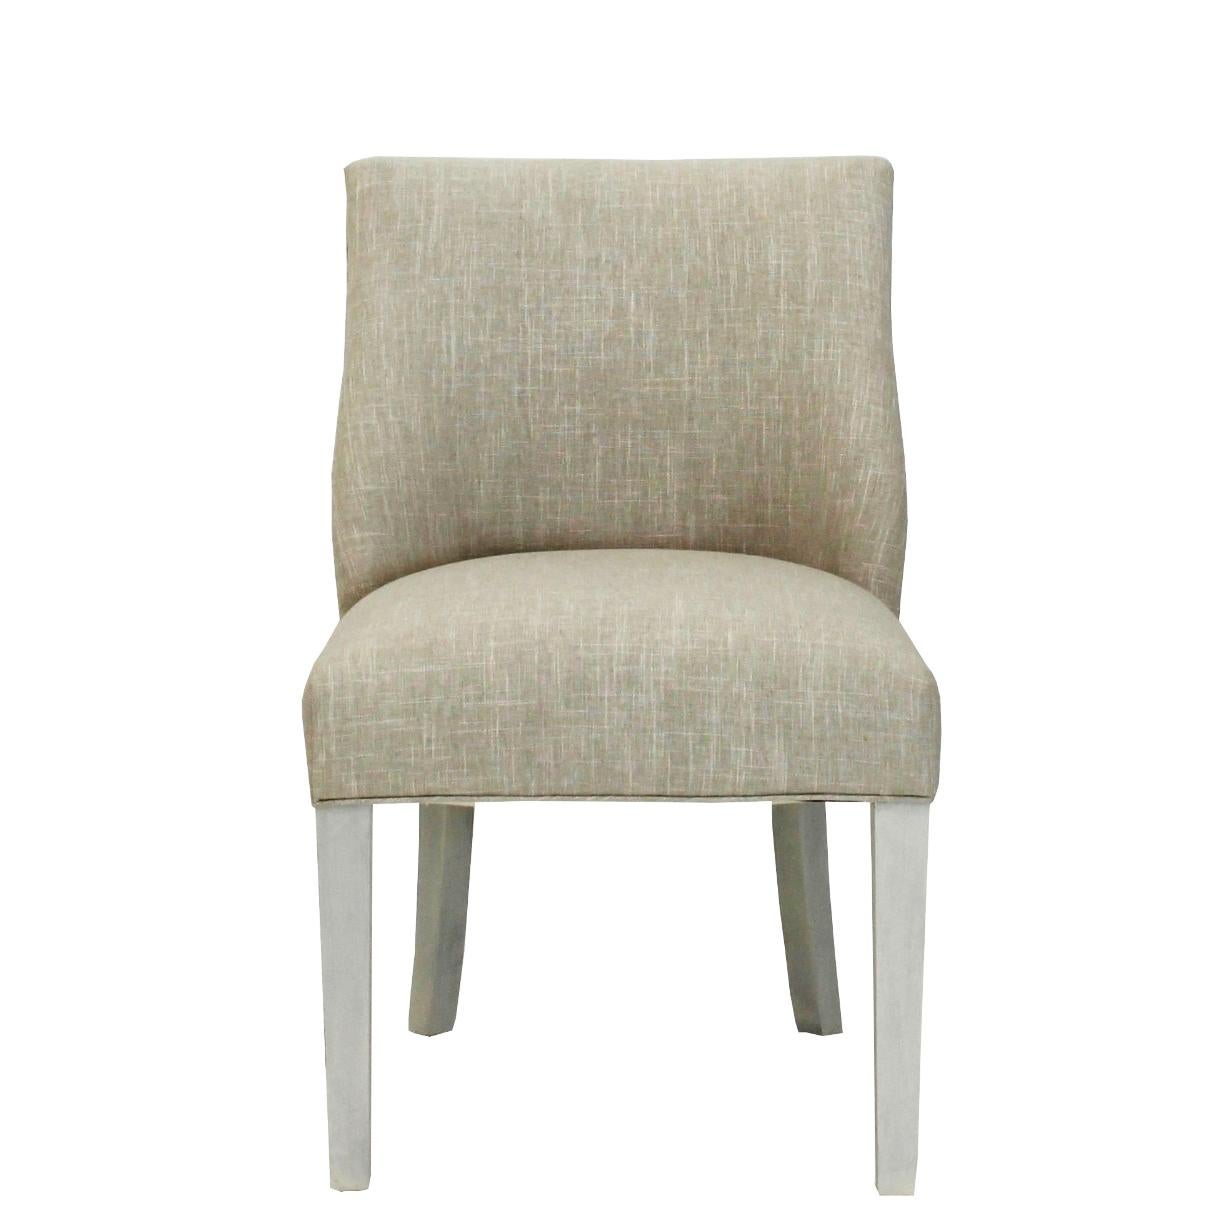 This chair is our tailored home exclusive 